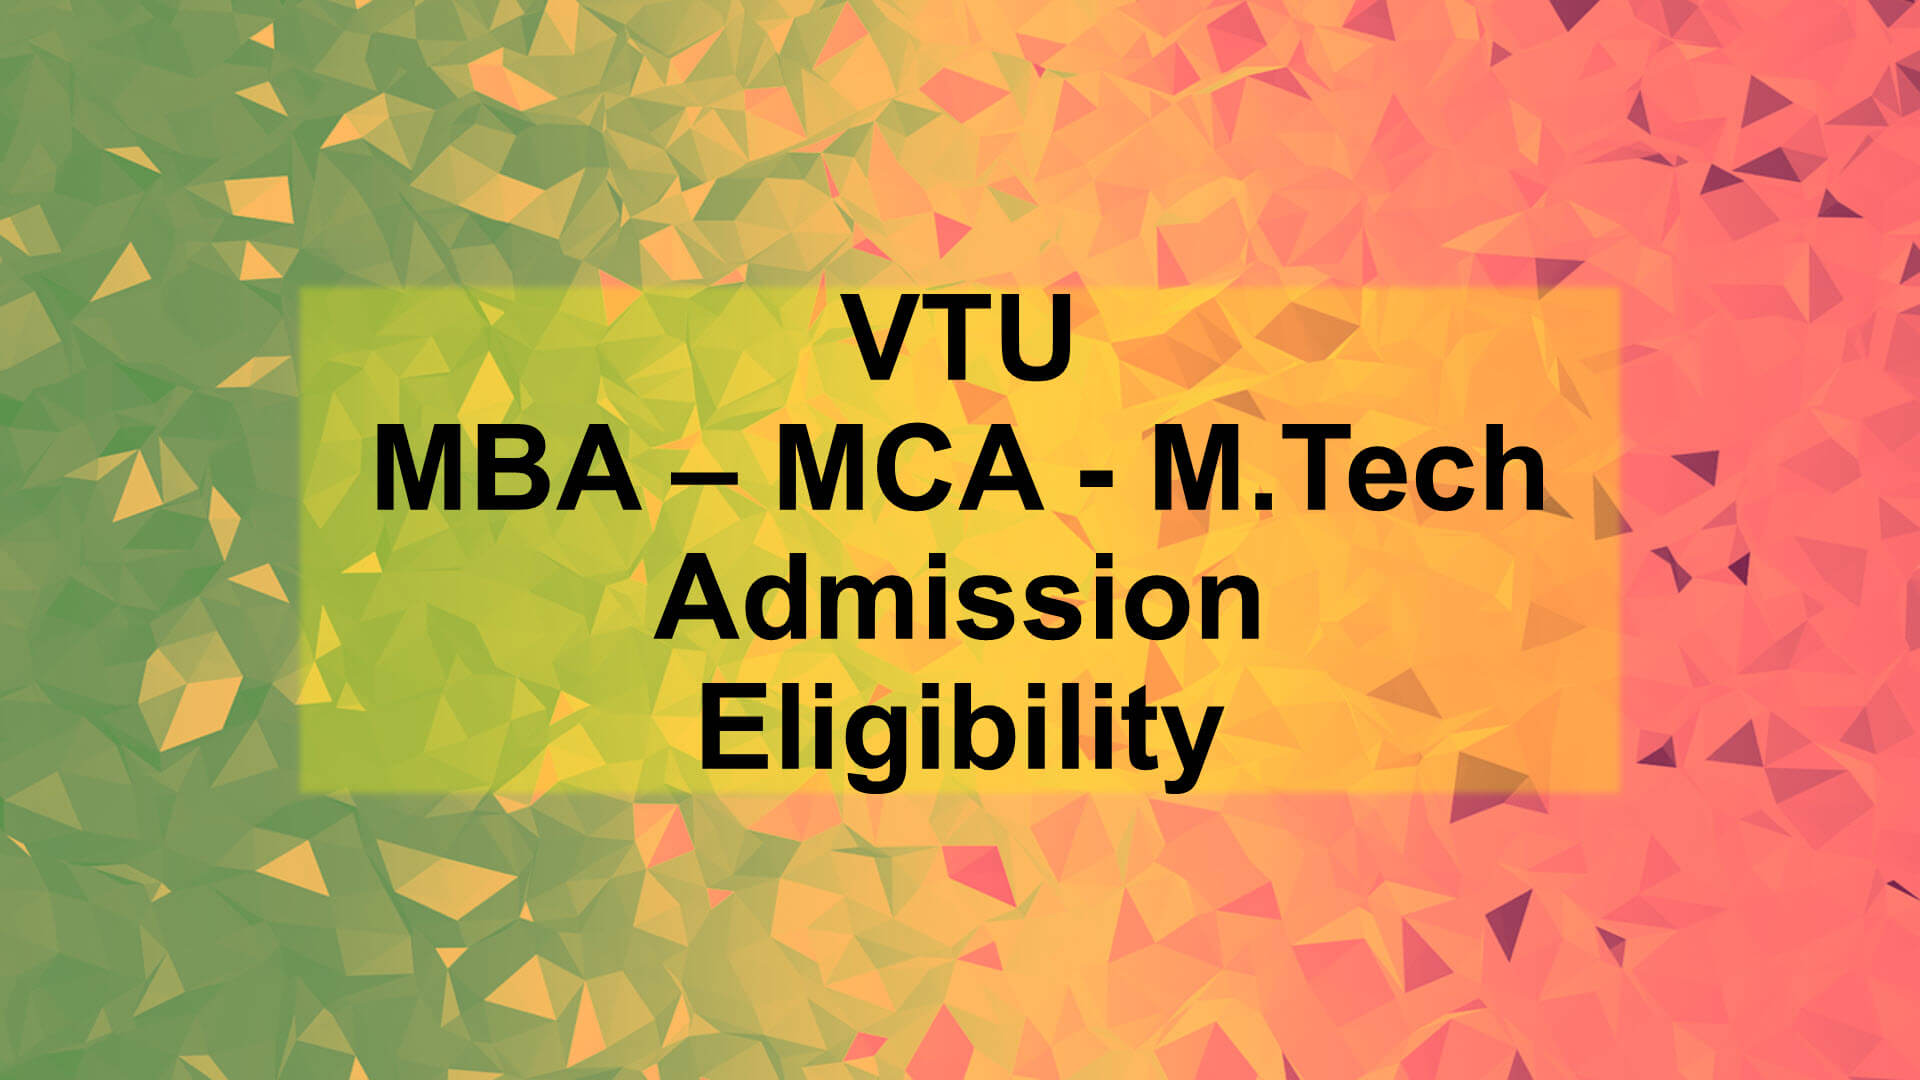 VTU Eligibility for Admission to MBA MCA MTech PG Courses